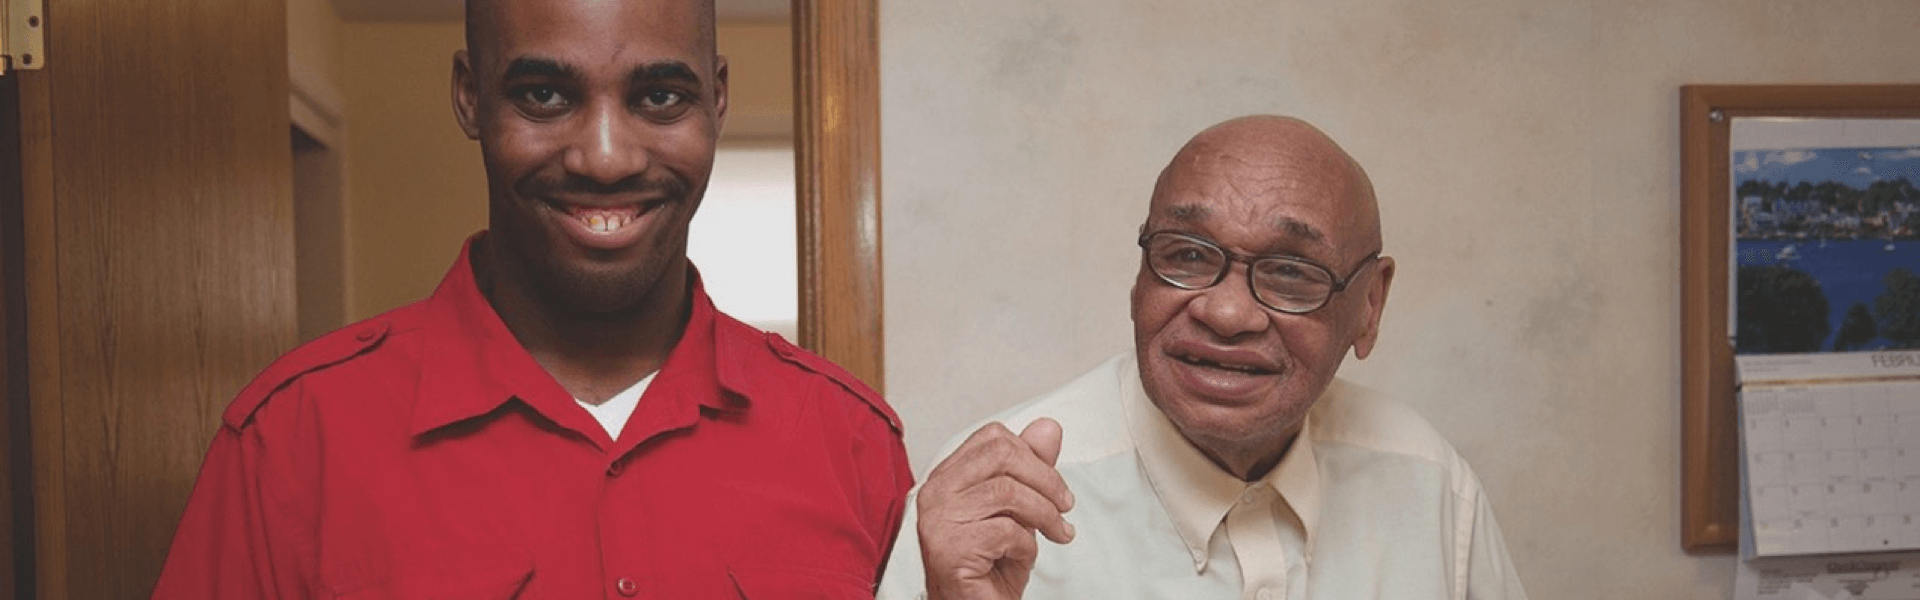 A young black man standing inside next to an older black man and smiling